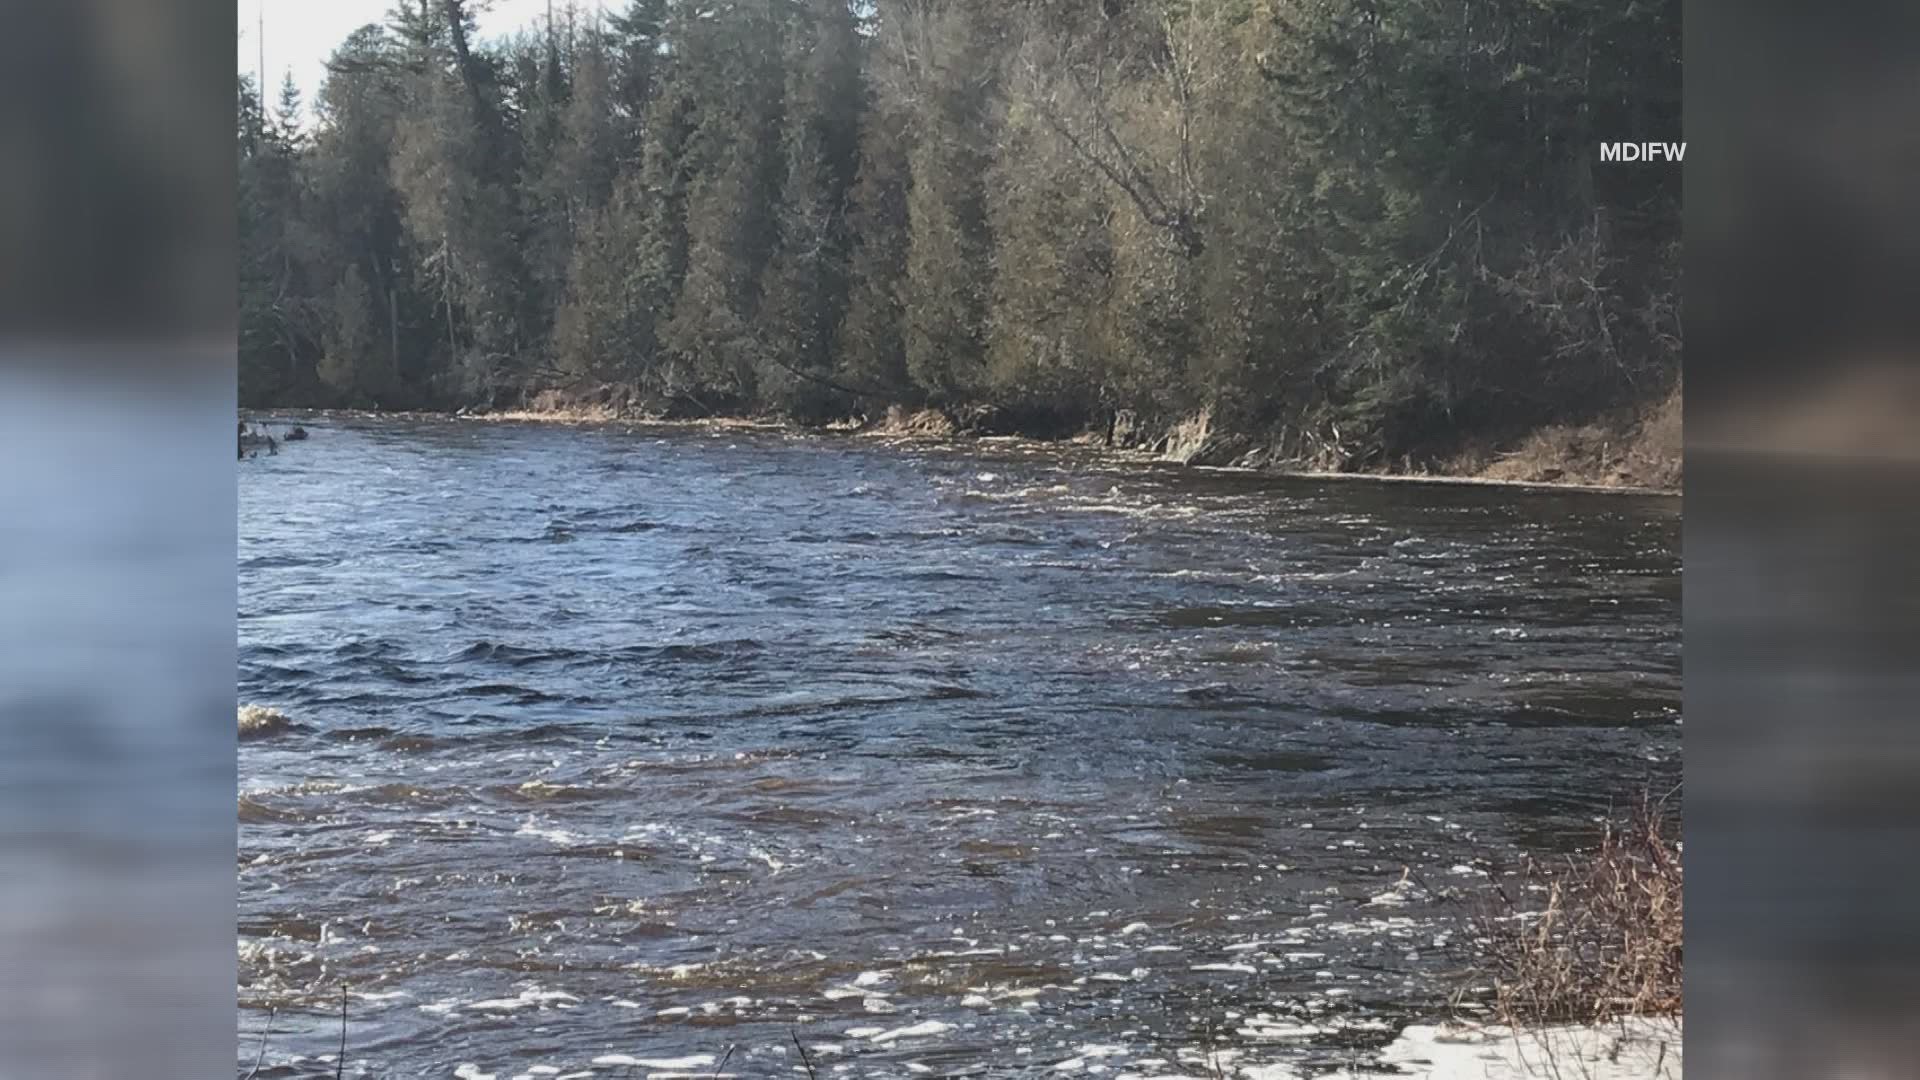 Maine warden rescue two stranded kayakers, Josh Ford and Alec Dalton in Aroostook county.